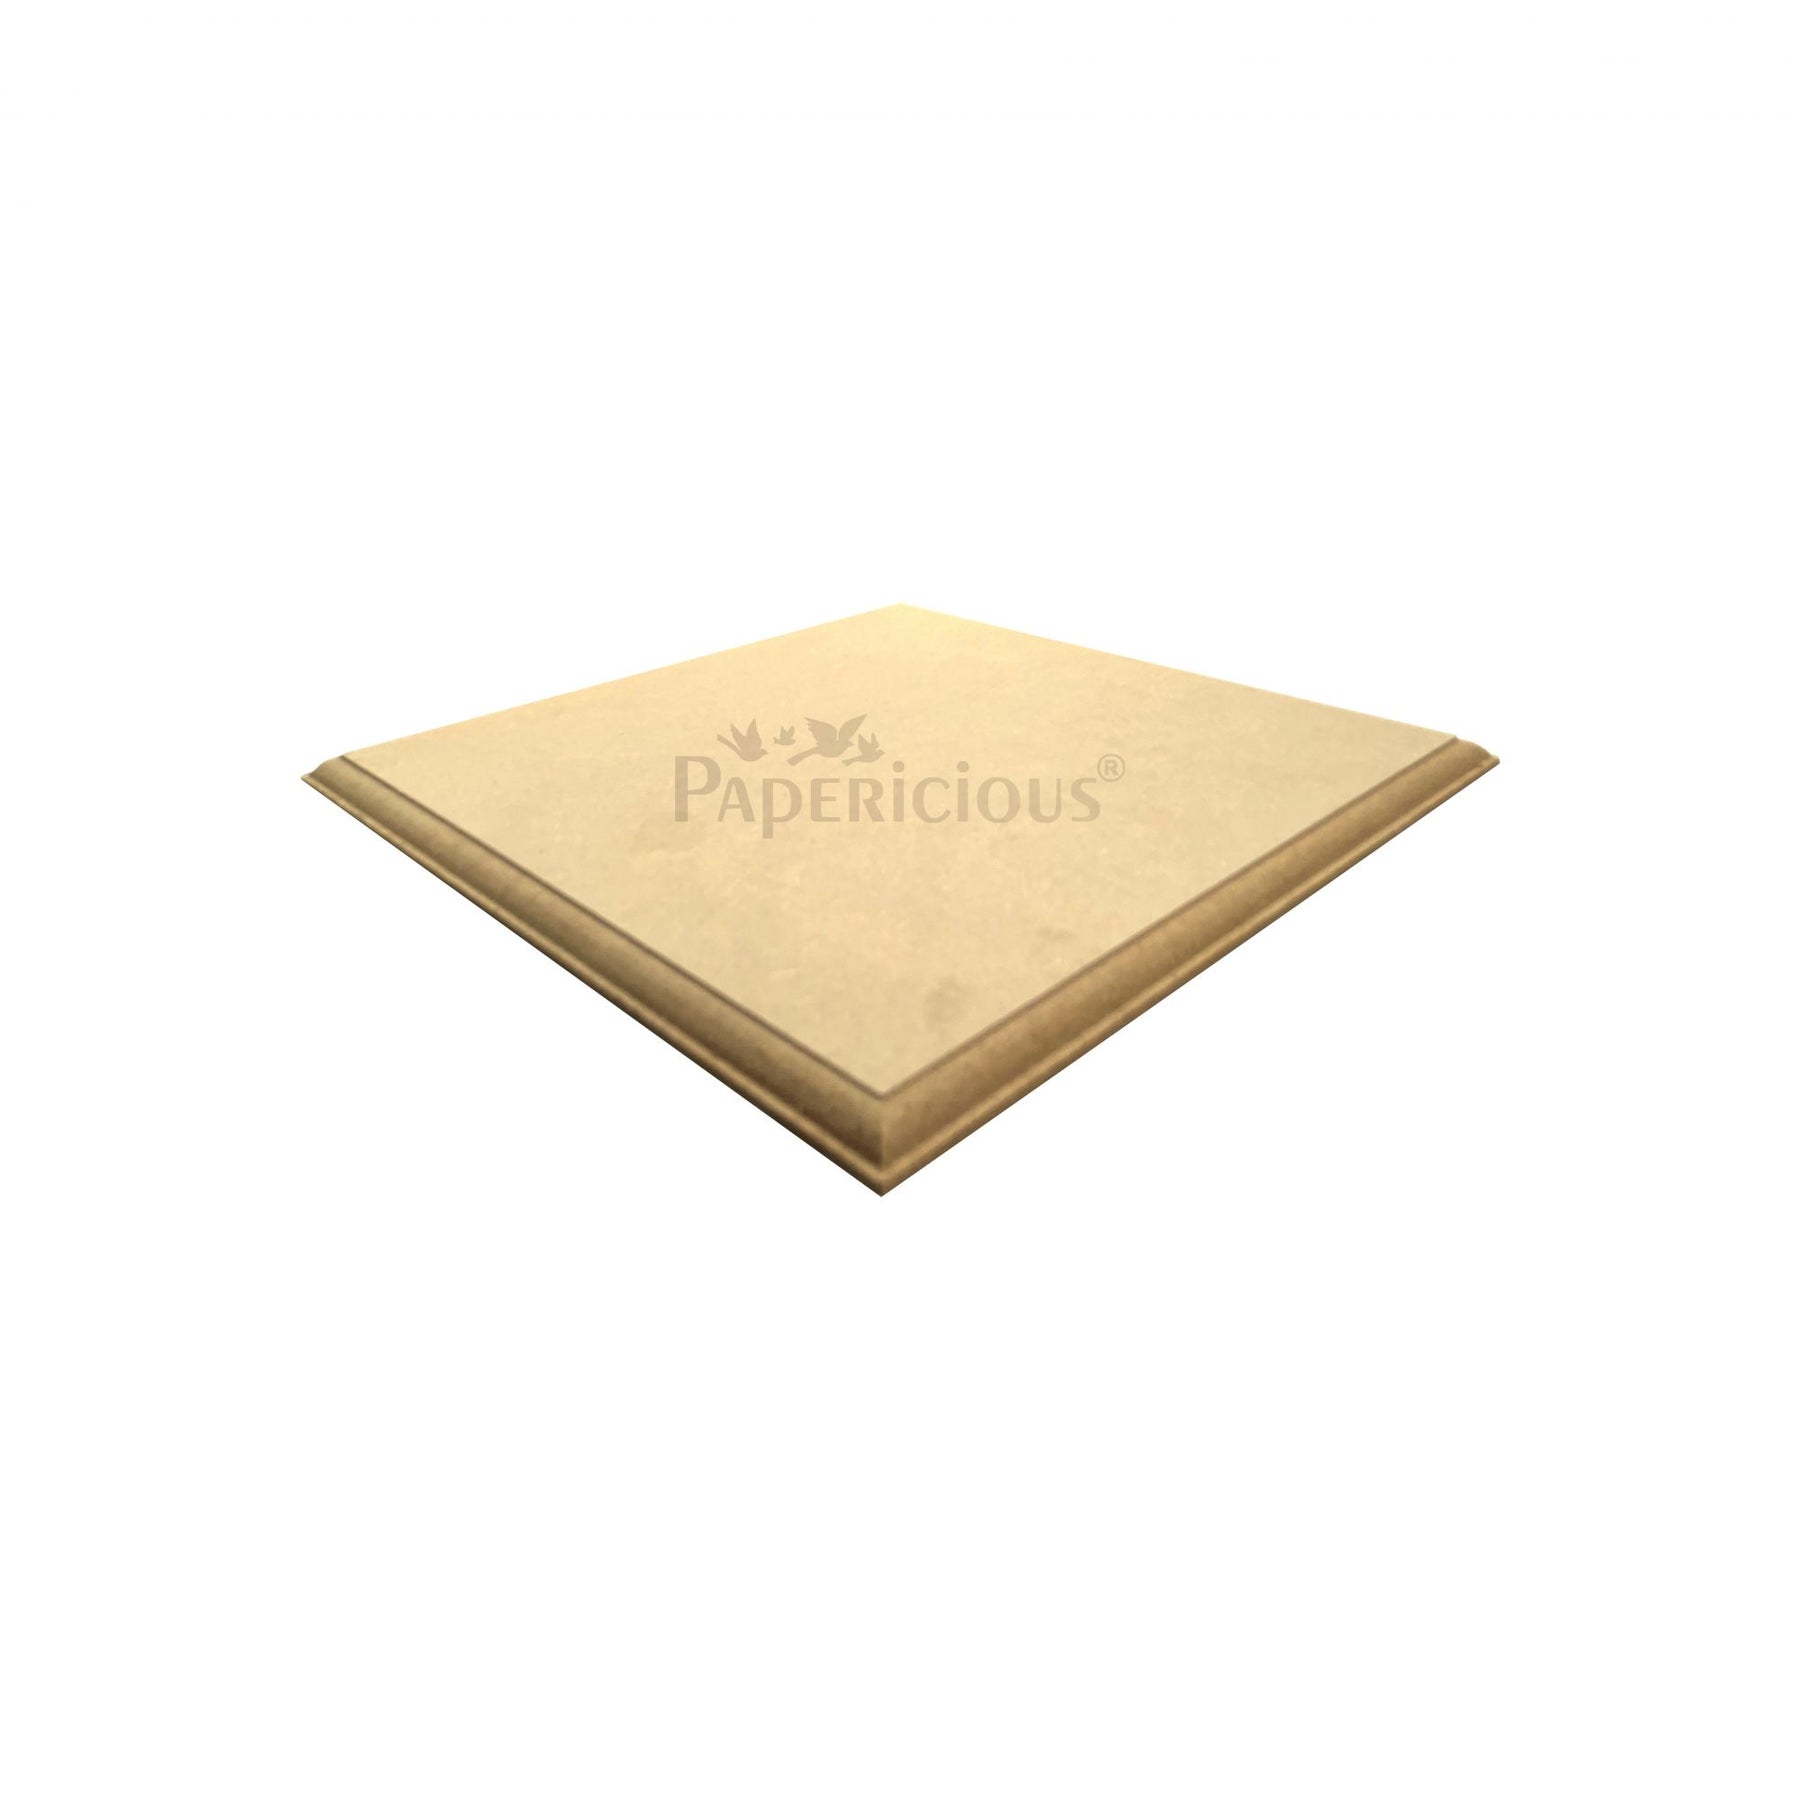 PAPERICIOUS MDF Square Base - 12 mm thick